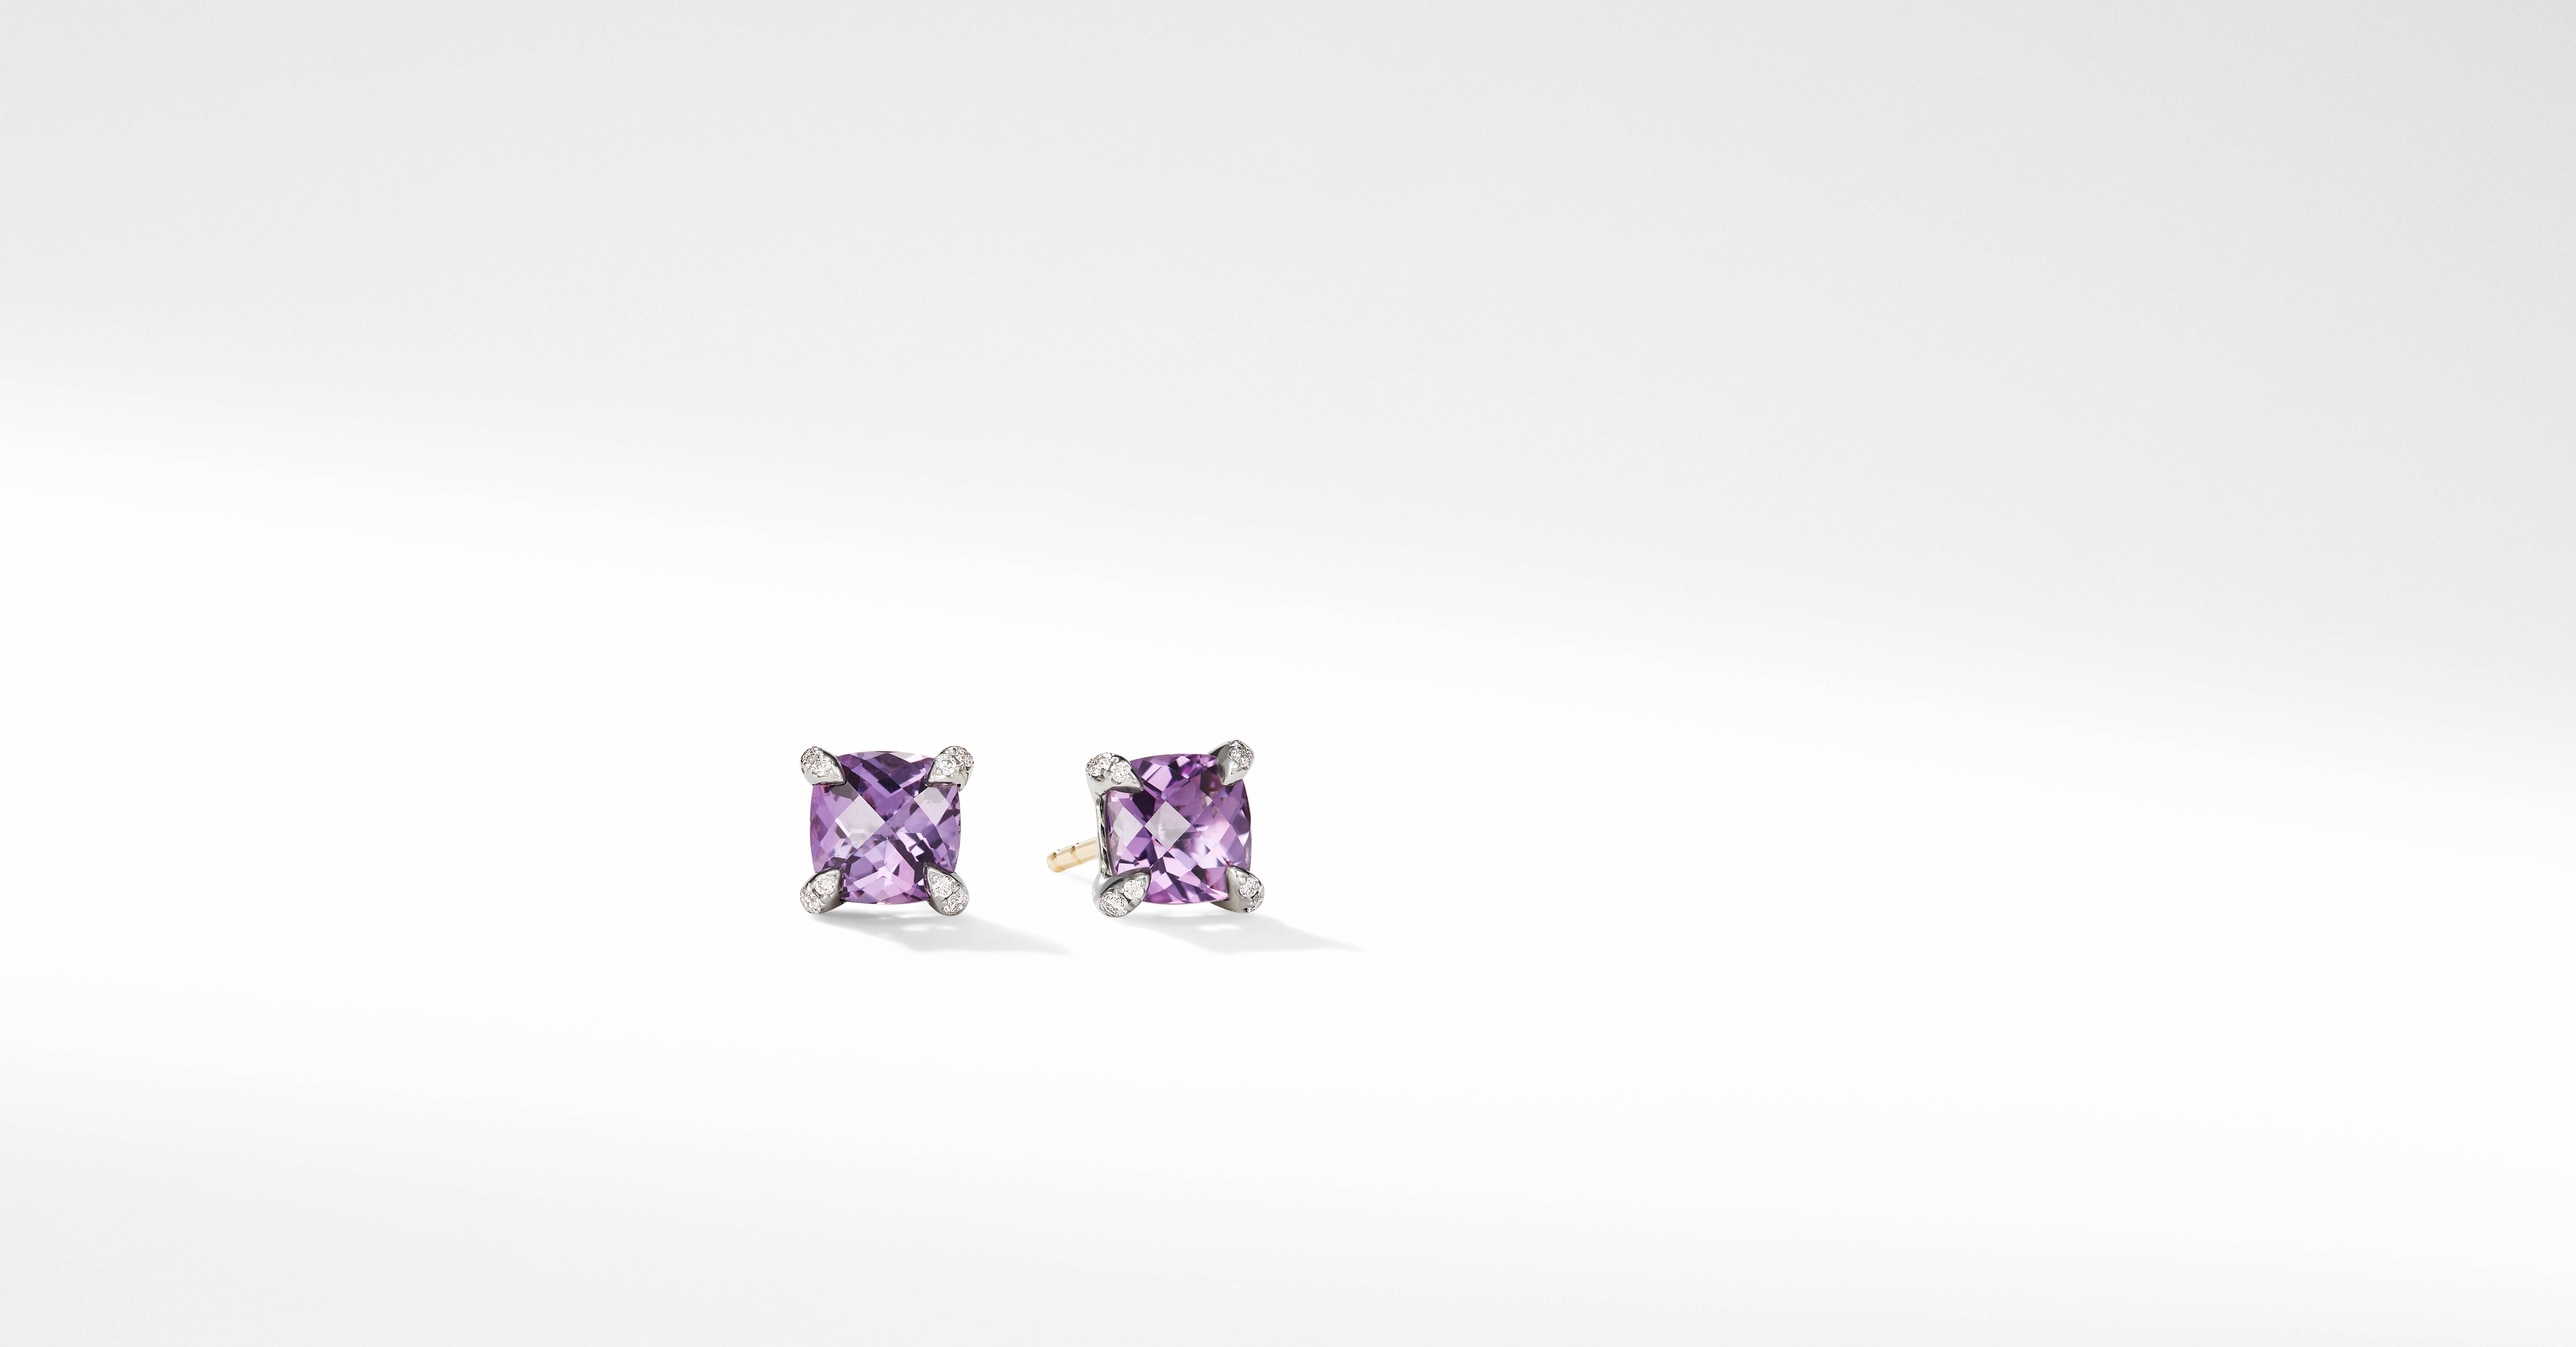 David Yurman | Petite Chatelaine® Stud Earrings in Sterling Silver with Amethyst and Pavé Diamonds